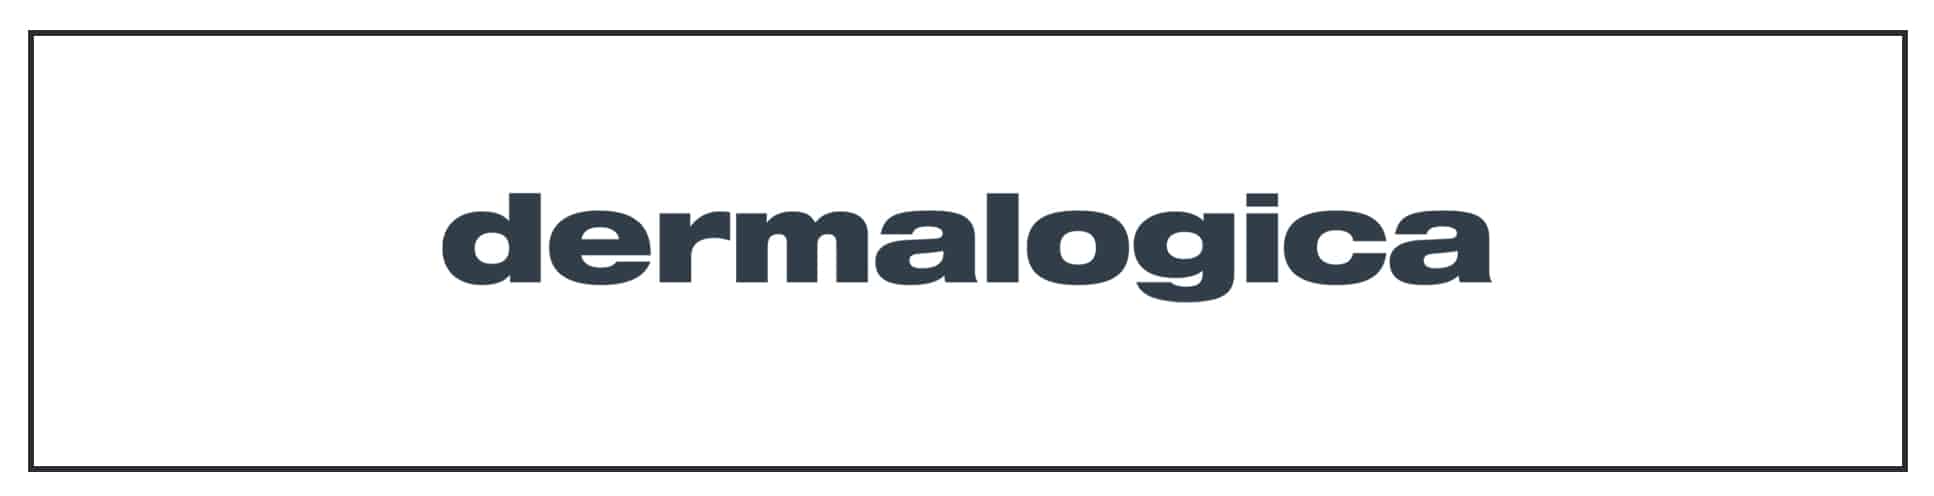 Dermalogica logo with the word dermalogica on it.